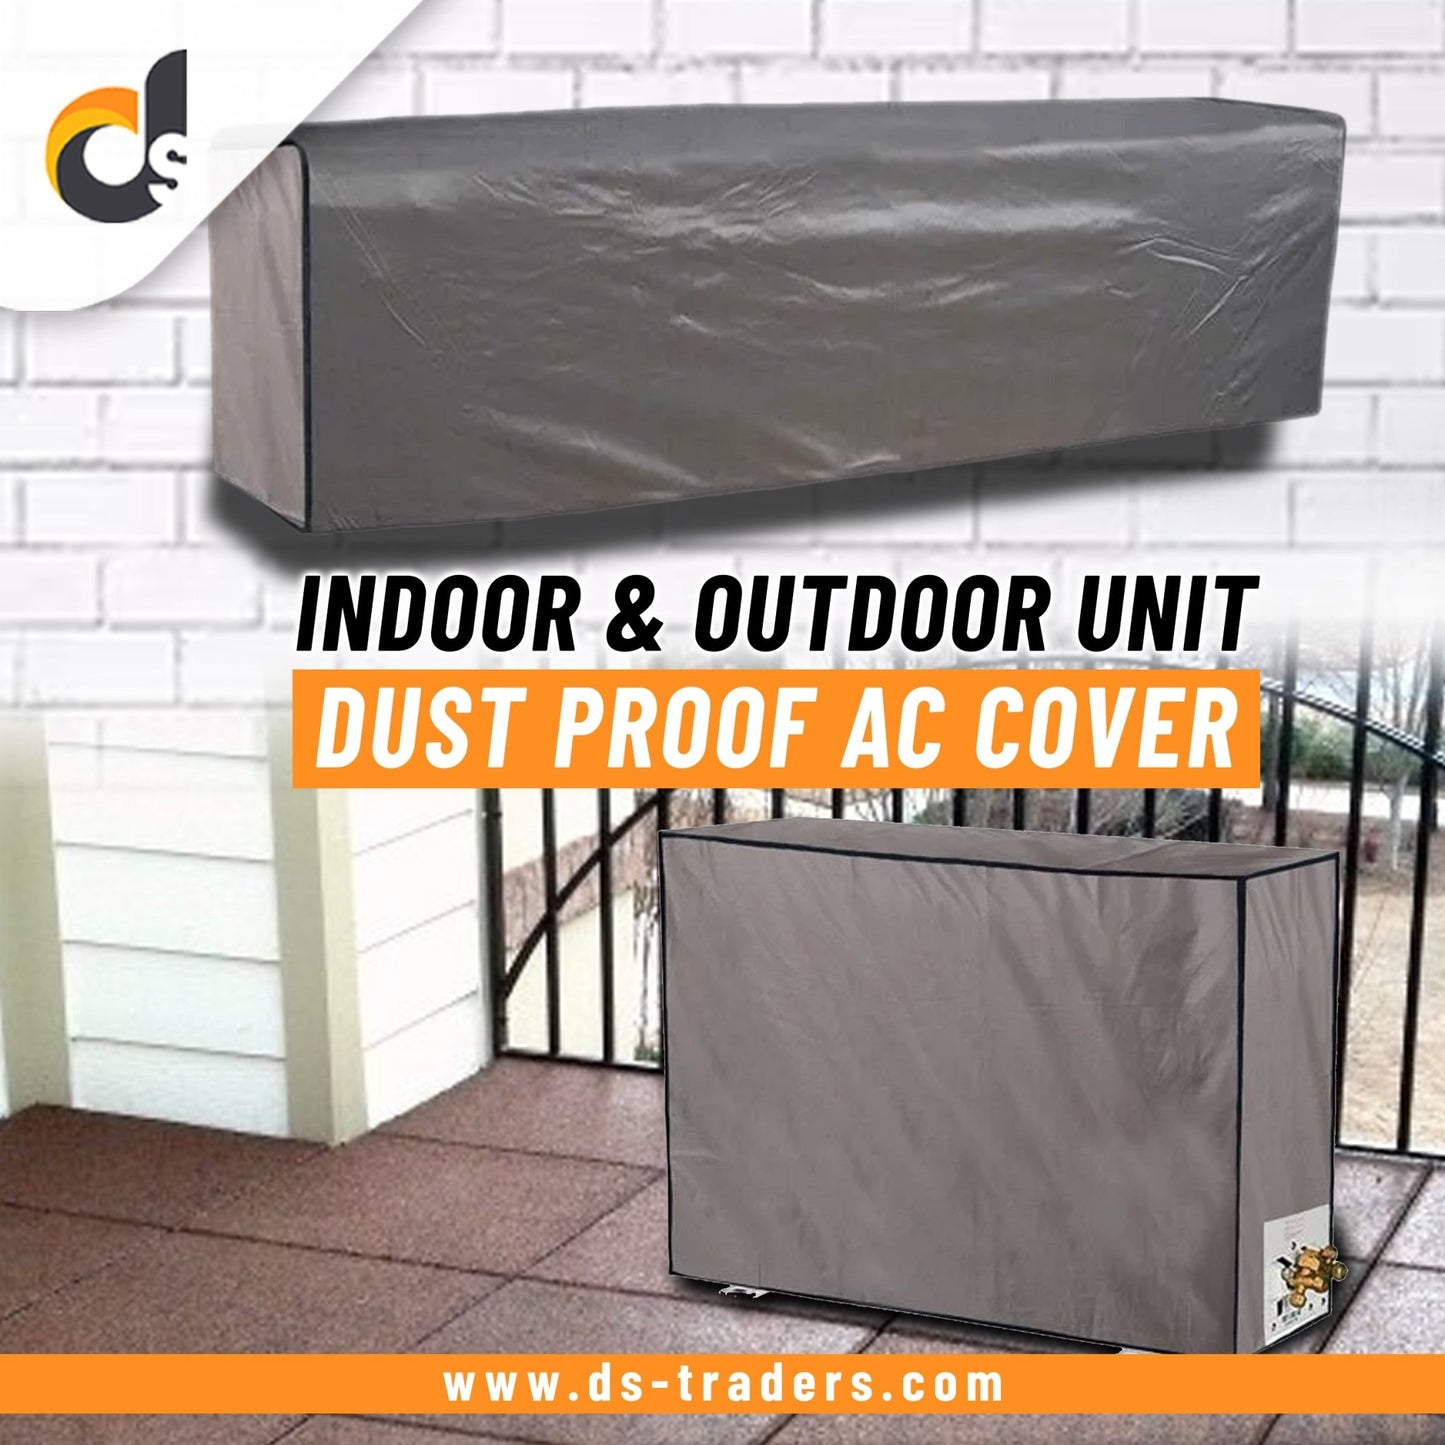 Dust & Proof AC Cover for Indoor & Outdoor Unit - DS Traders